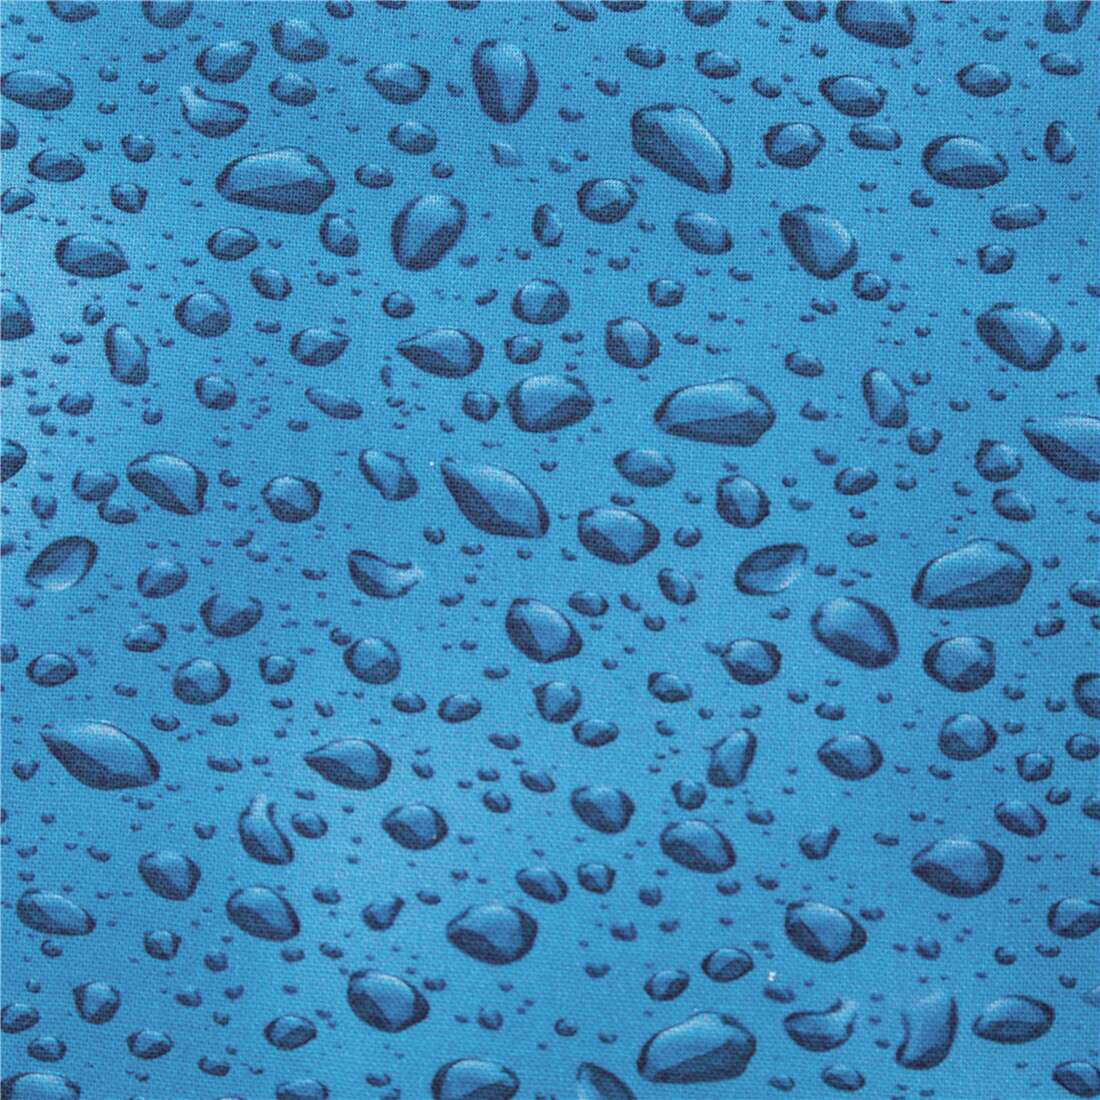 water droplets on blue sky like background by Quilting Treasures rainy  effect - modeS4u